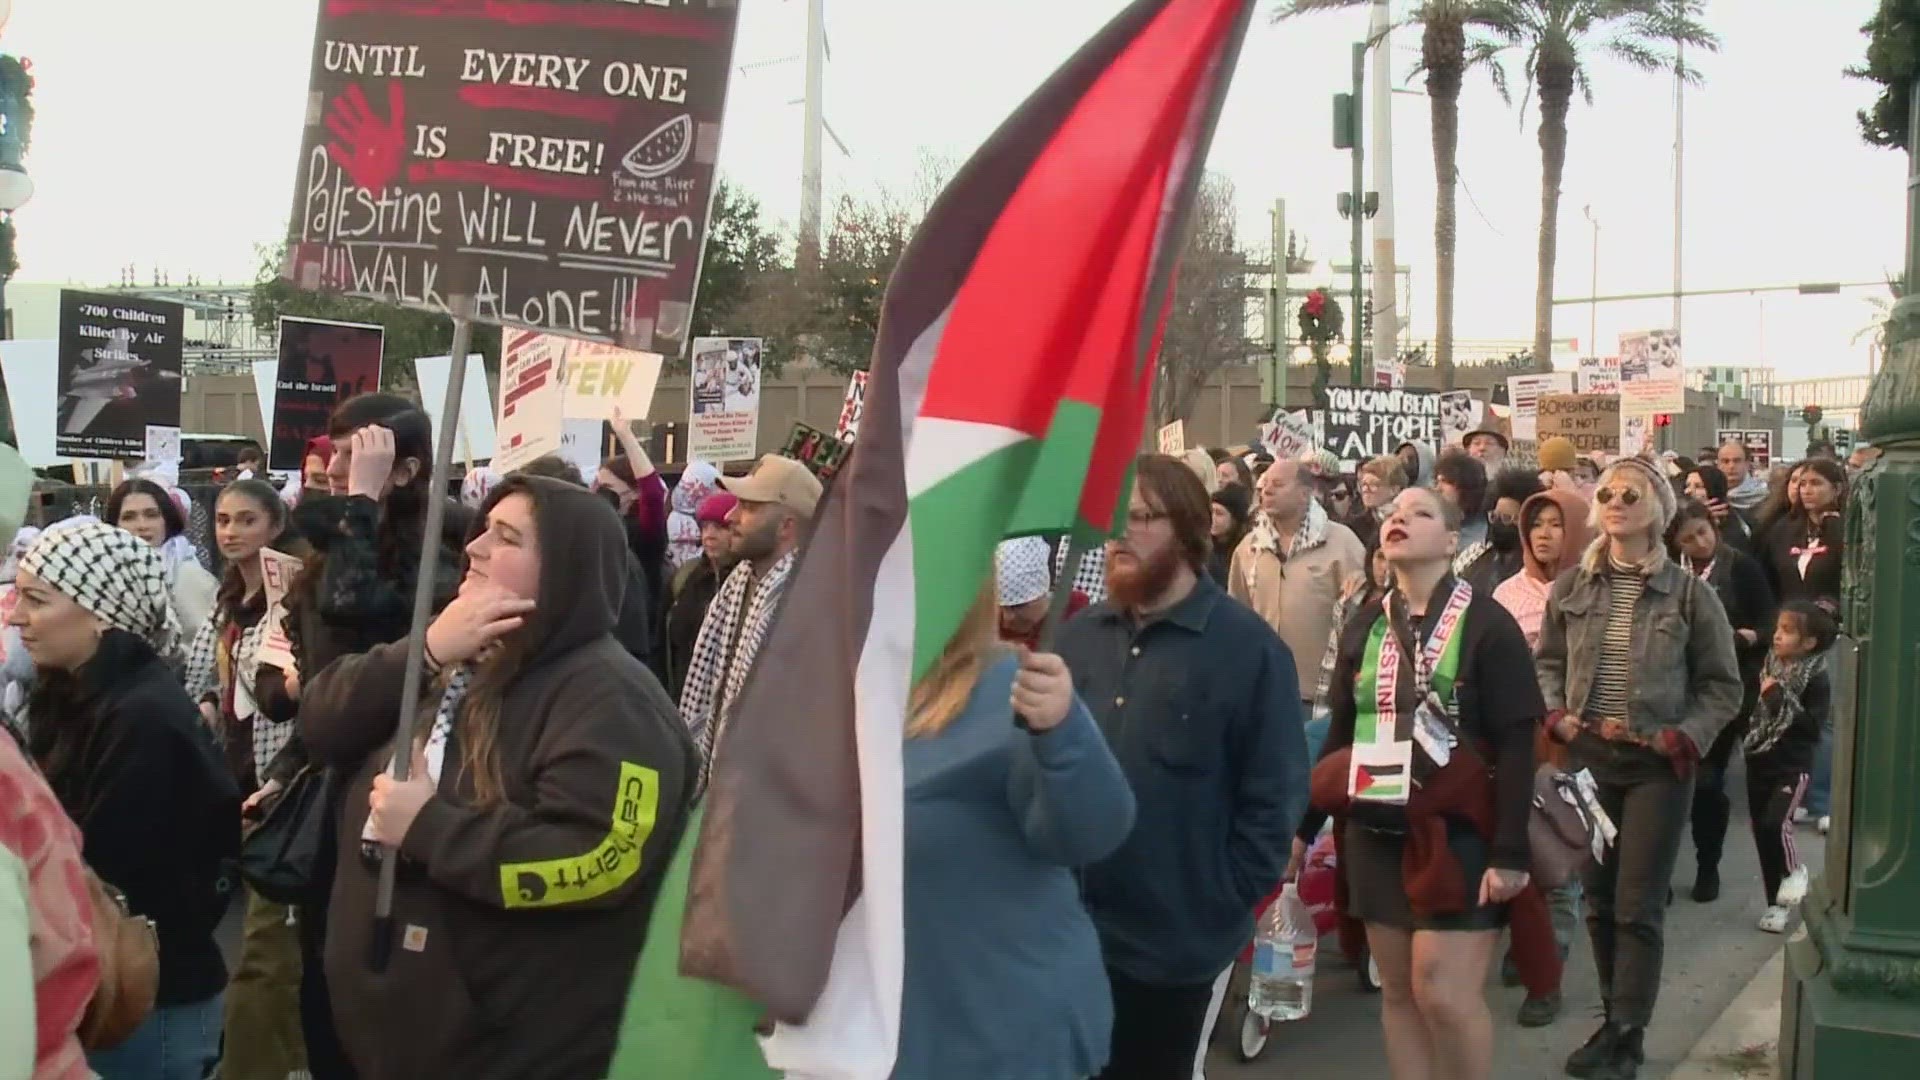 The organizers say there are 25,000 members of the Muslim community living in the New Orleans area, and 10,000 are Palestinian.